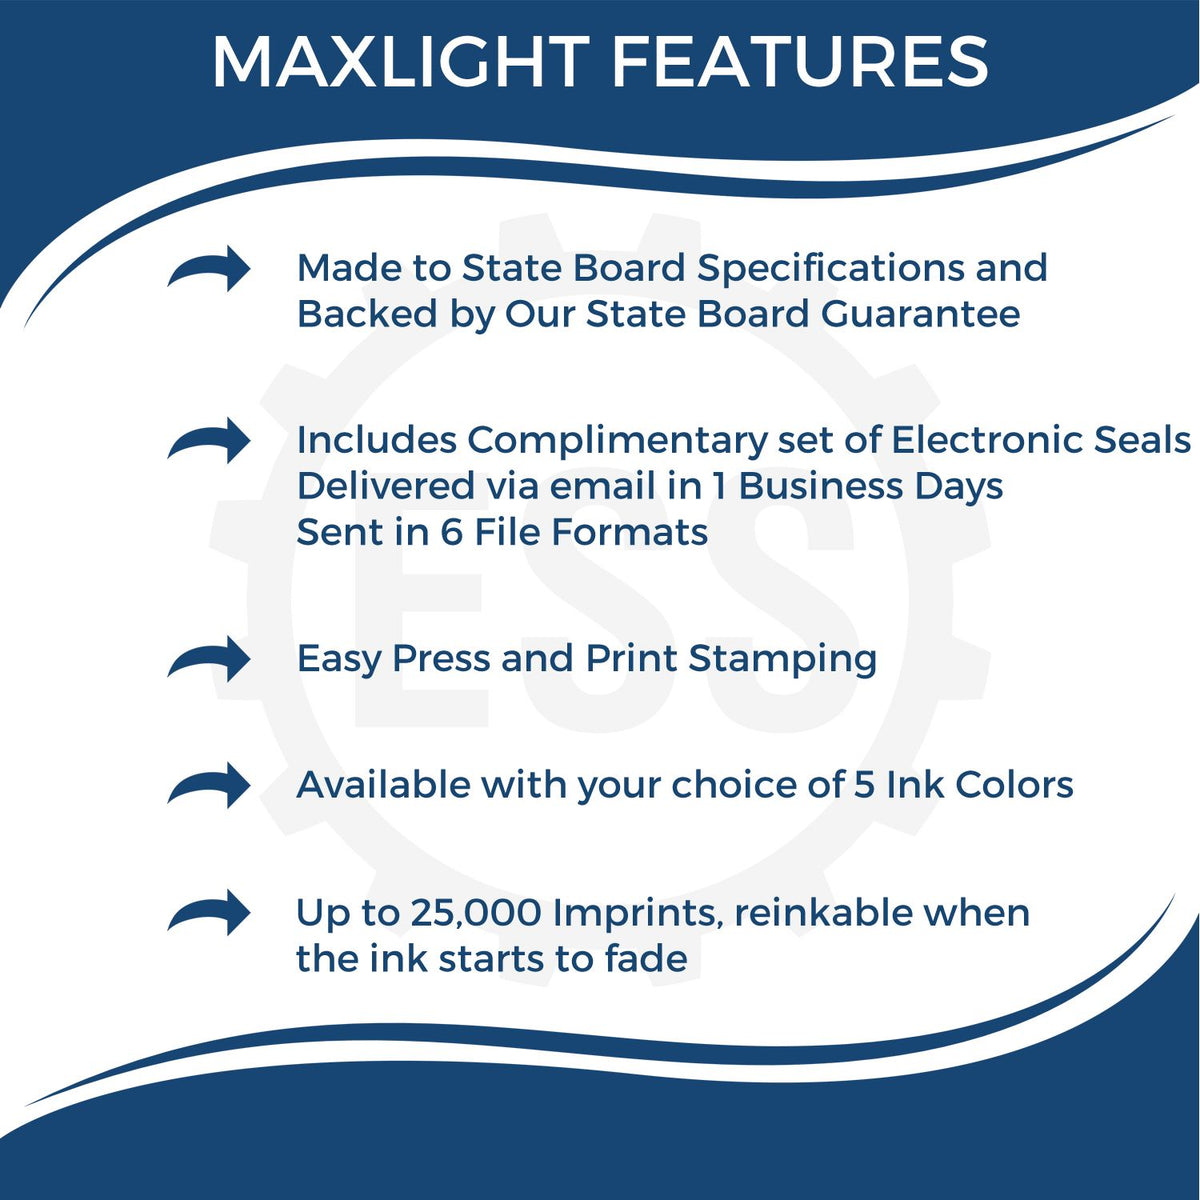 A picture of an infographic highlighting the selling points for the Premium MaxLight Pre-Inked Idaho Landscape Architectural Stamp